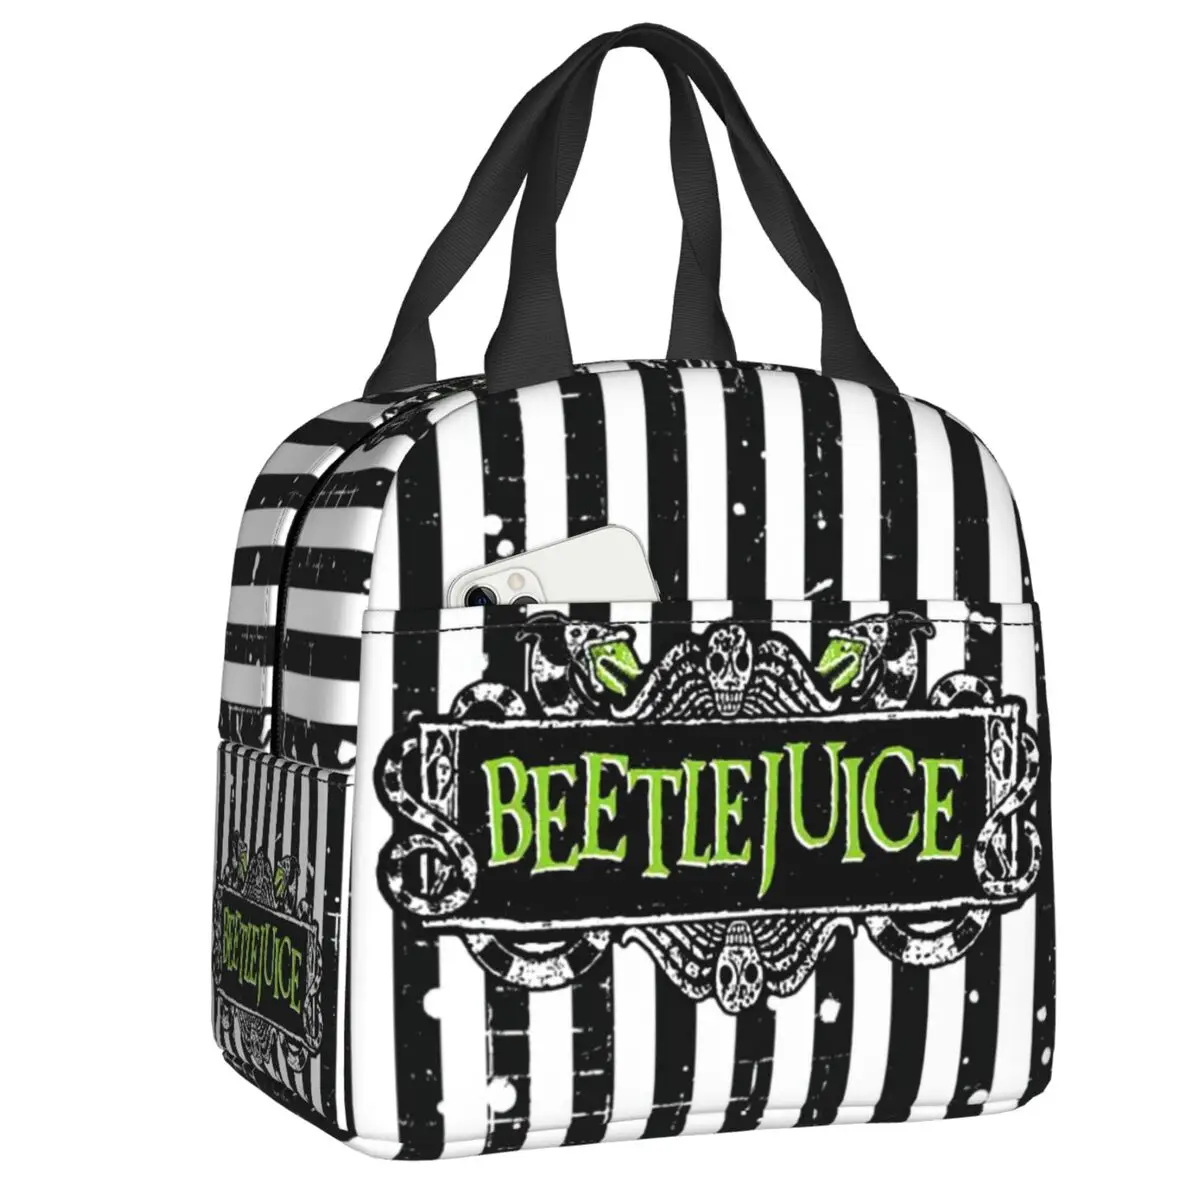 Tim Burton Horror Movie Beetlejuice Resuable Lunch Box for Women Kids School Waterproof Cooler Thermal Food Insulated Lunch Bag